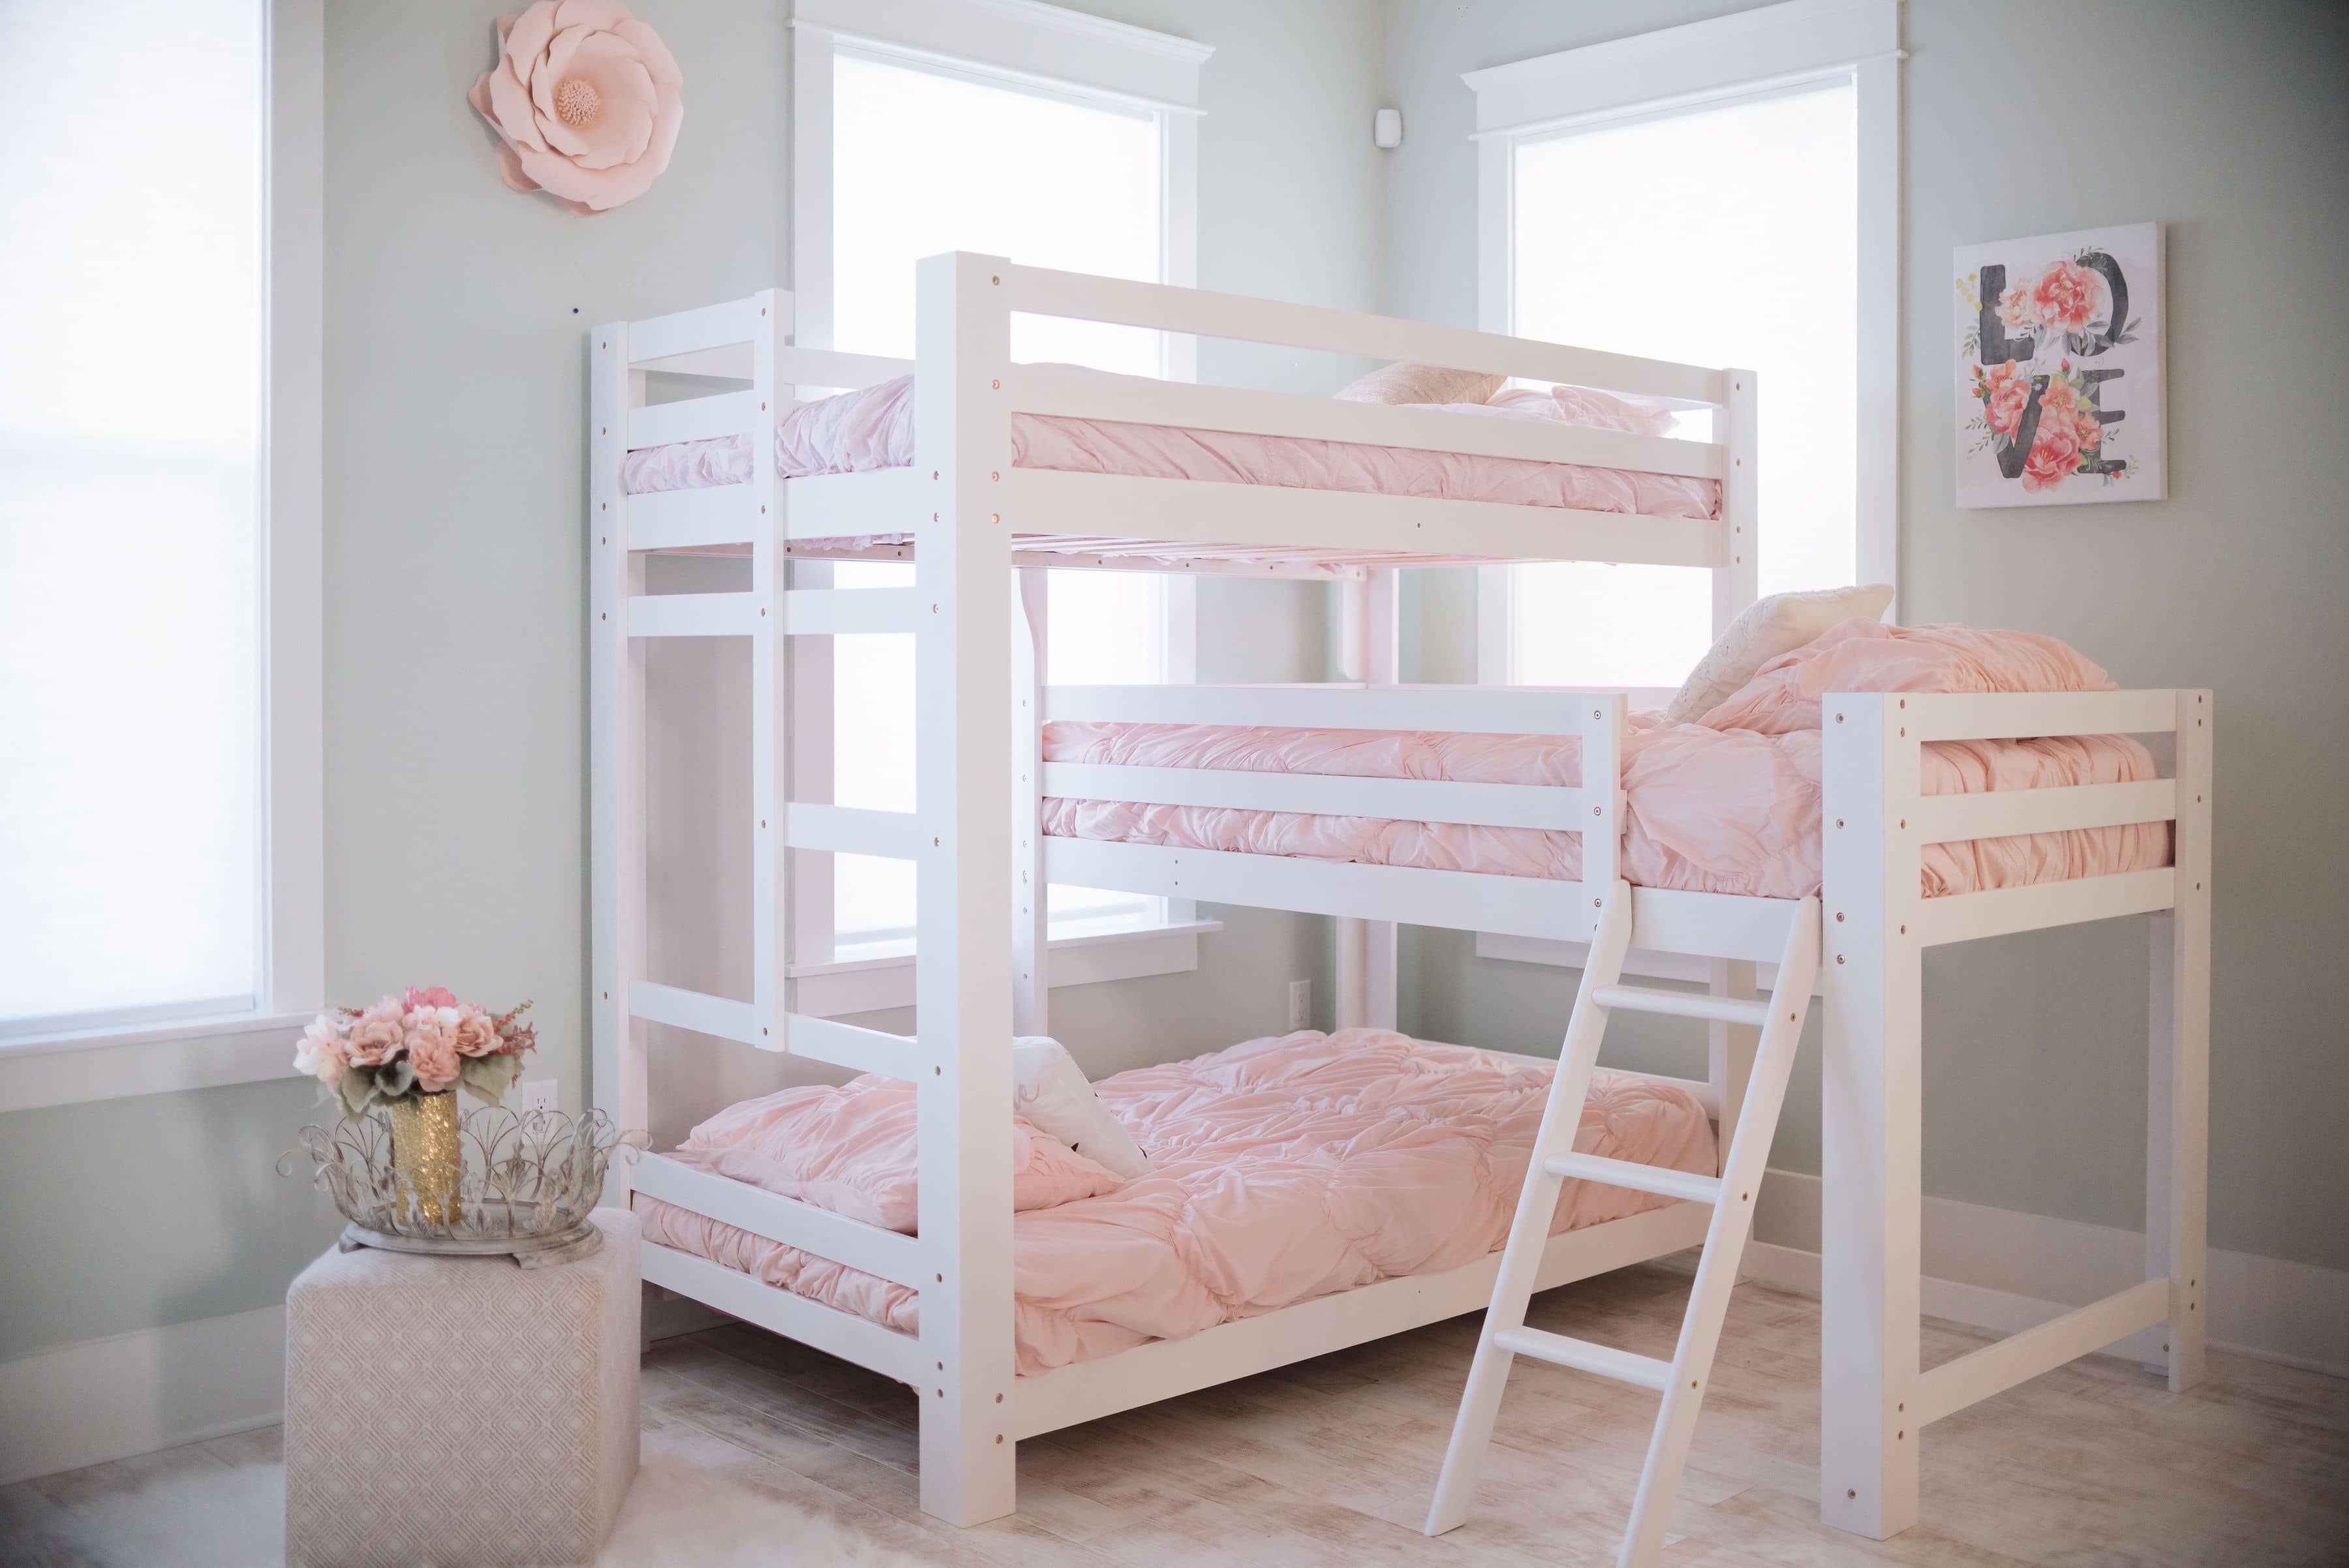 3 tier bunk beds for sale